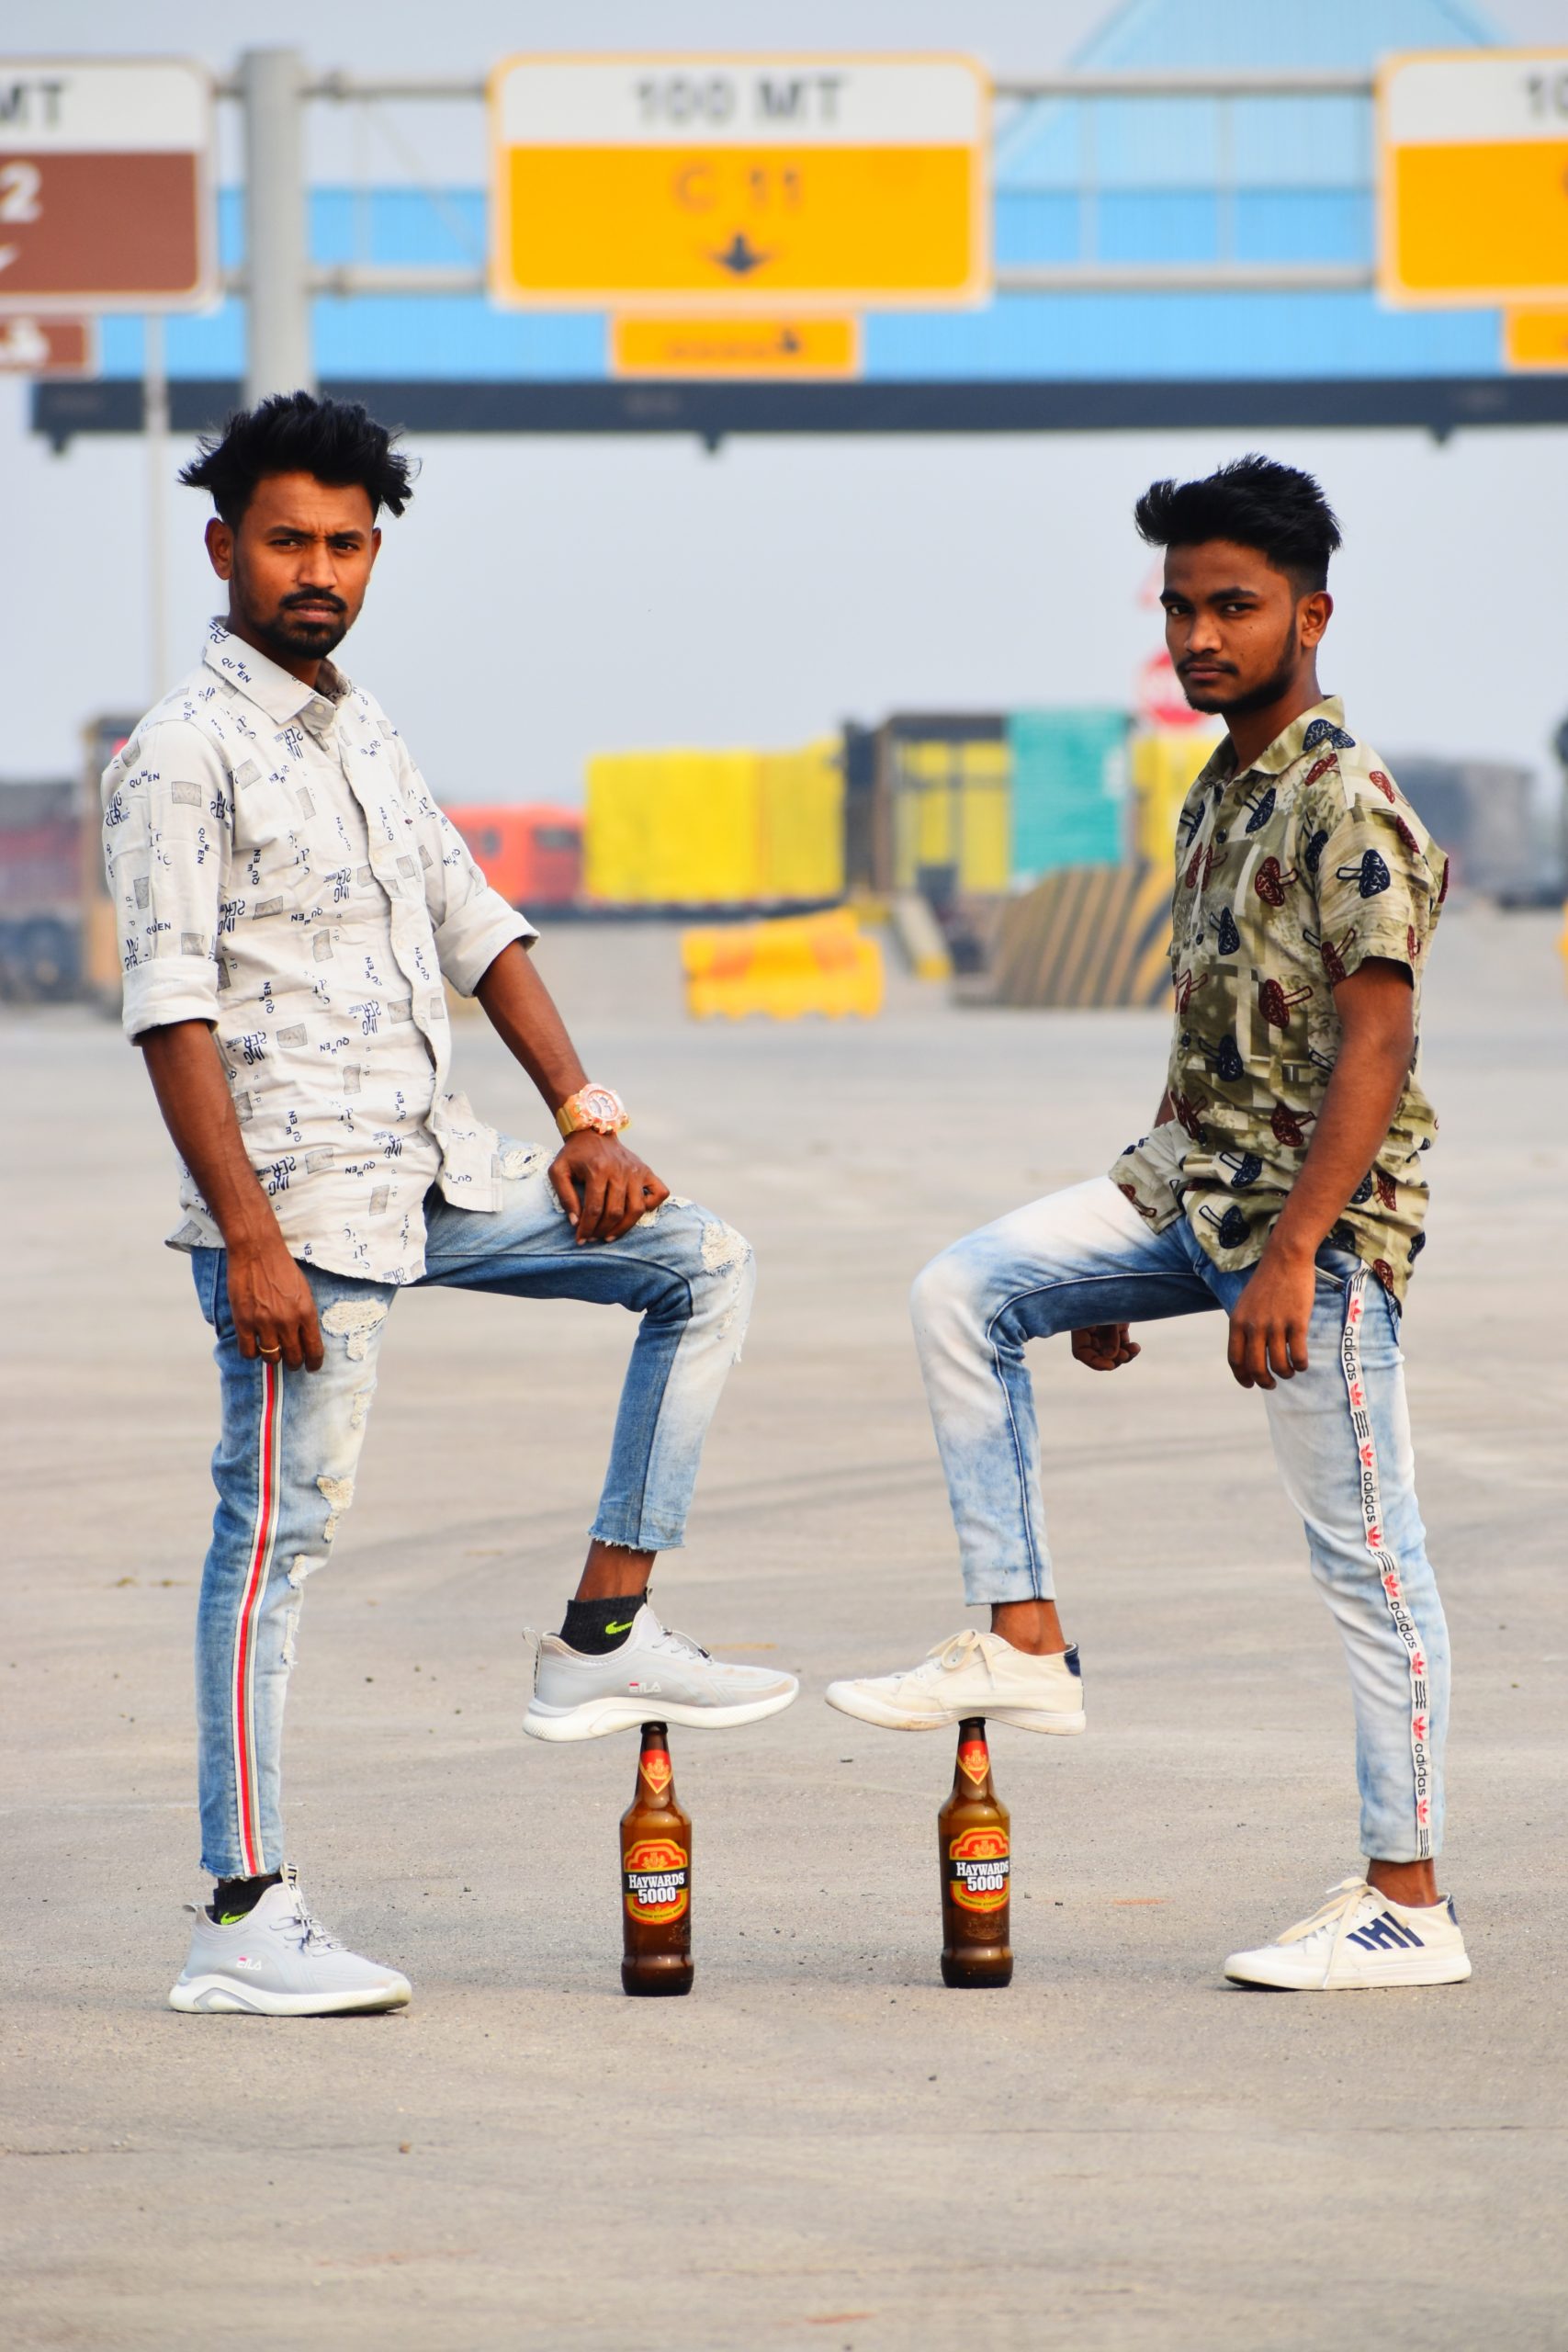 Two boys posing with Howards beer bottle